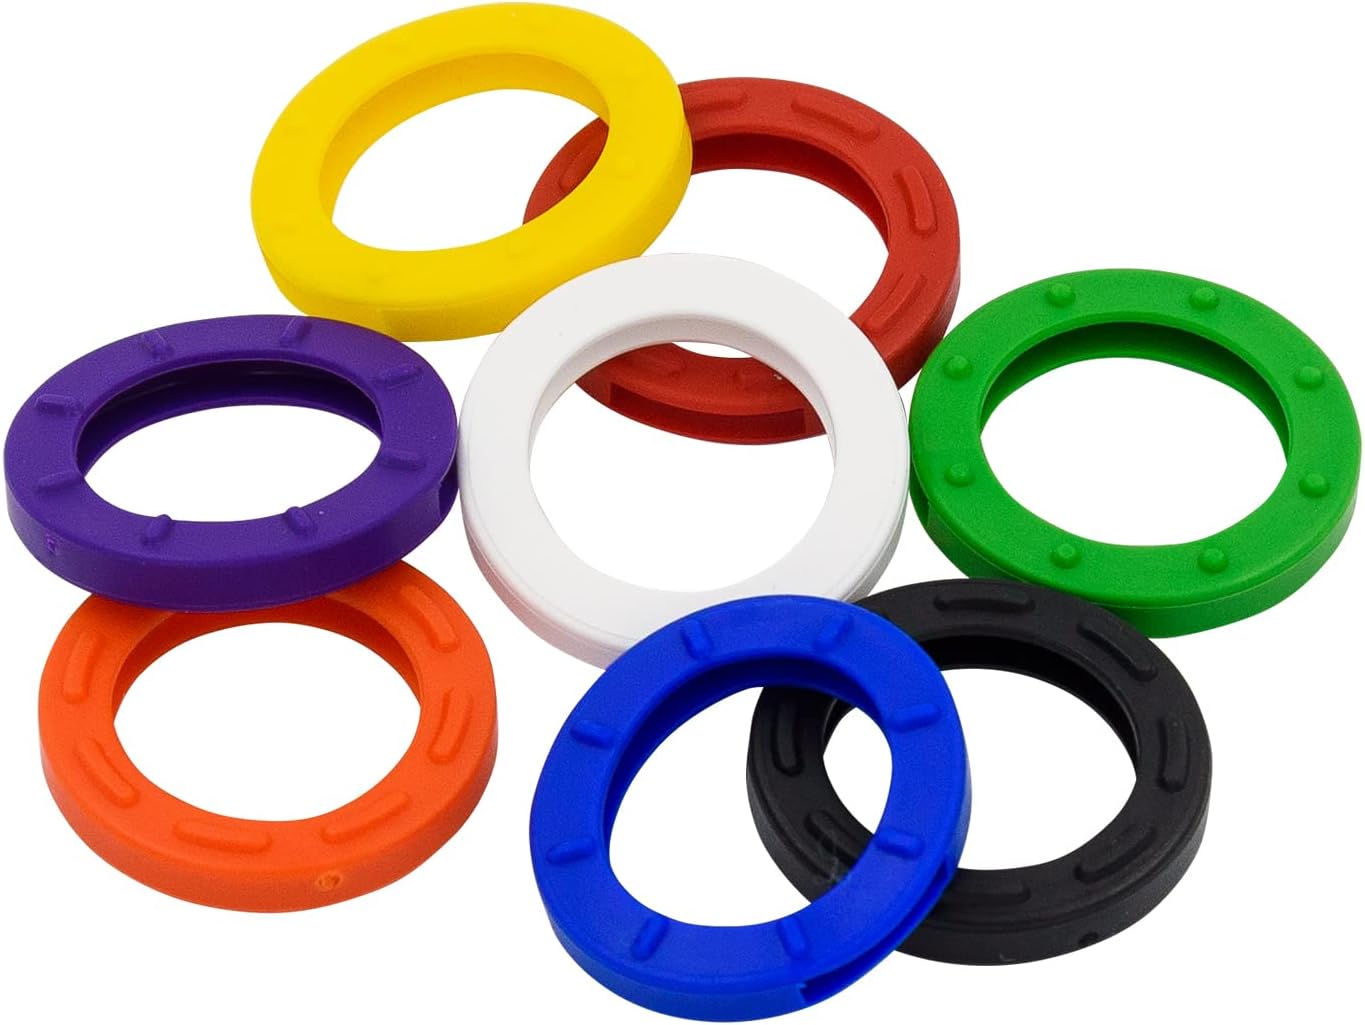 Multi-colored rings for marking keys with a round head